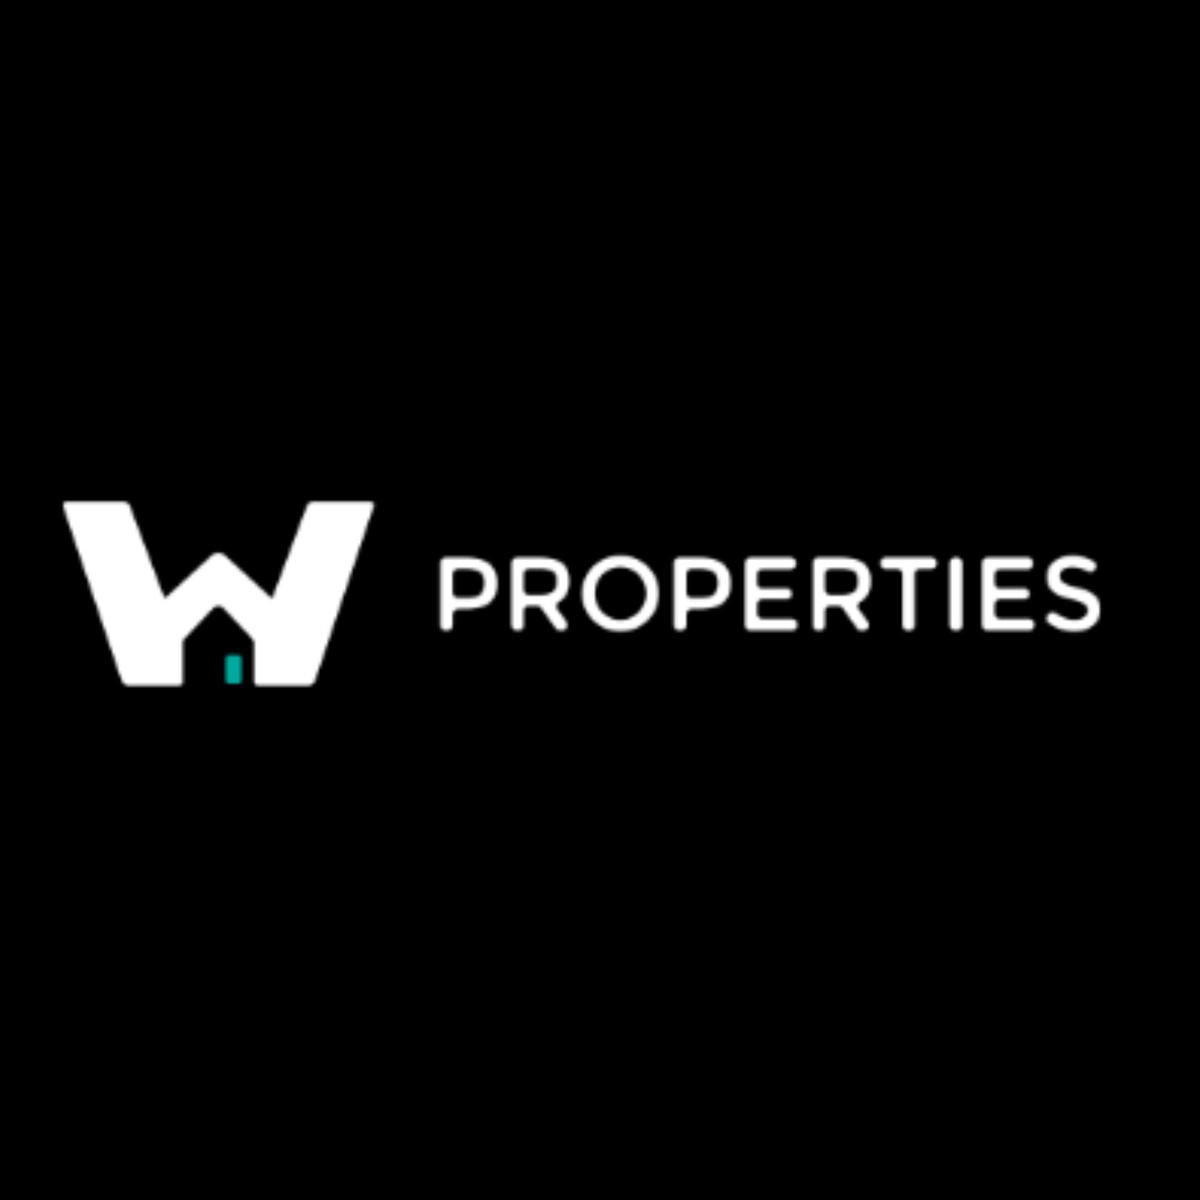 W Properties: The Pinnacle of Property Management